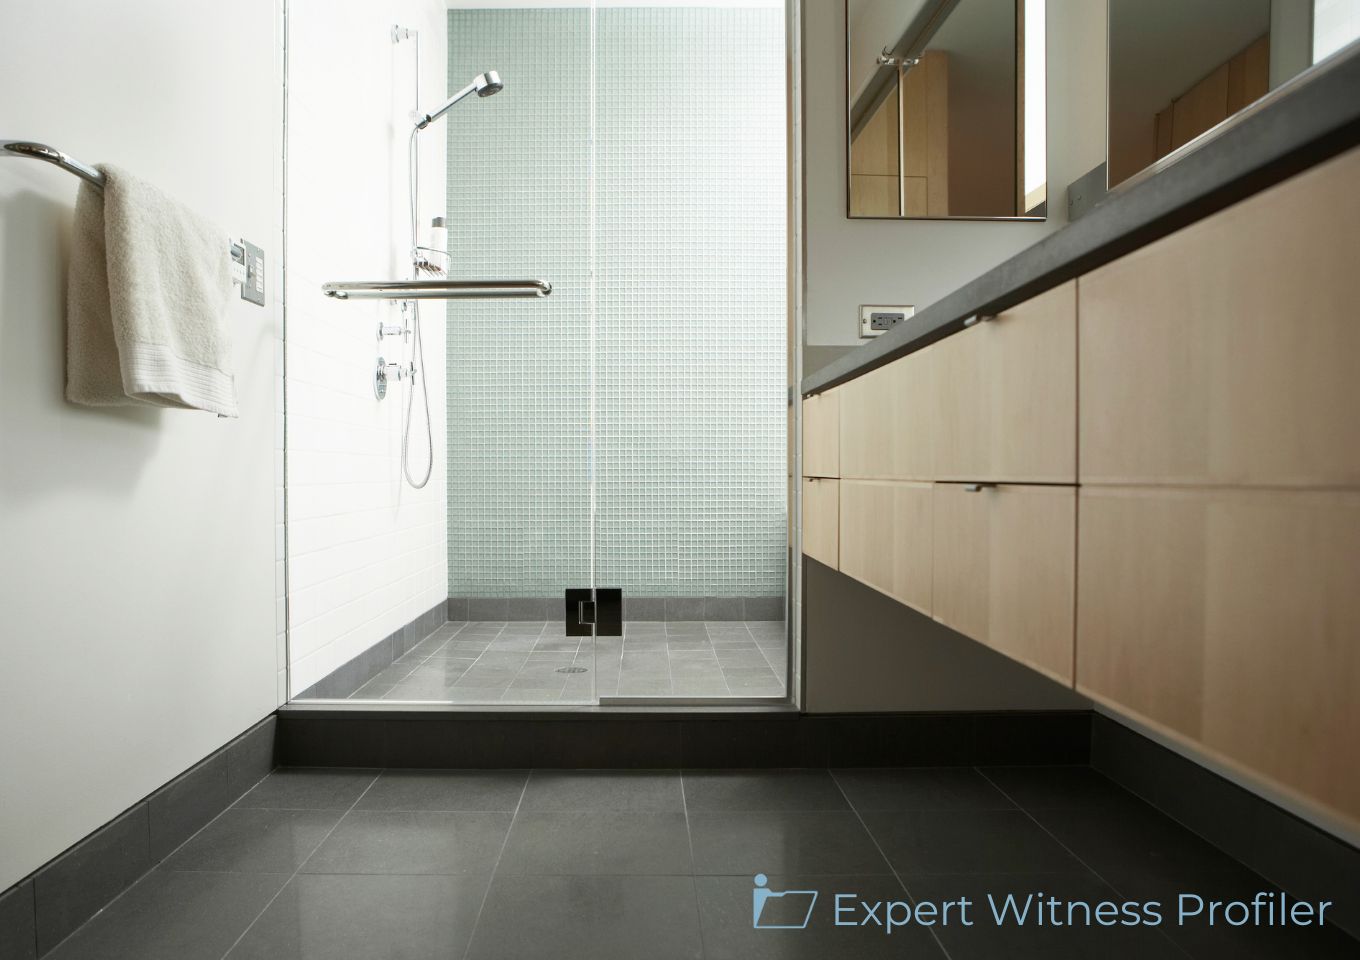 Mechanical Engineering Expert Witness Opinions on Slipperiness of Shower Floor Admitted